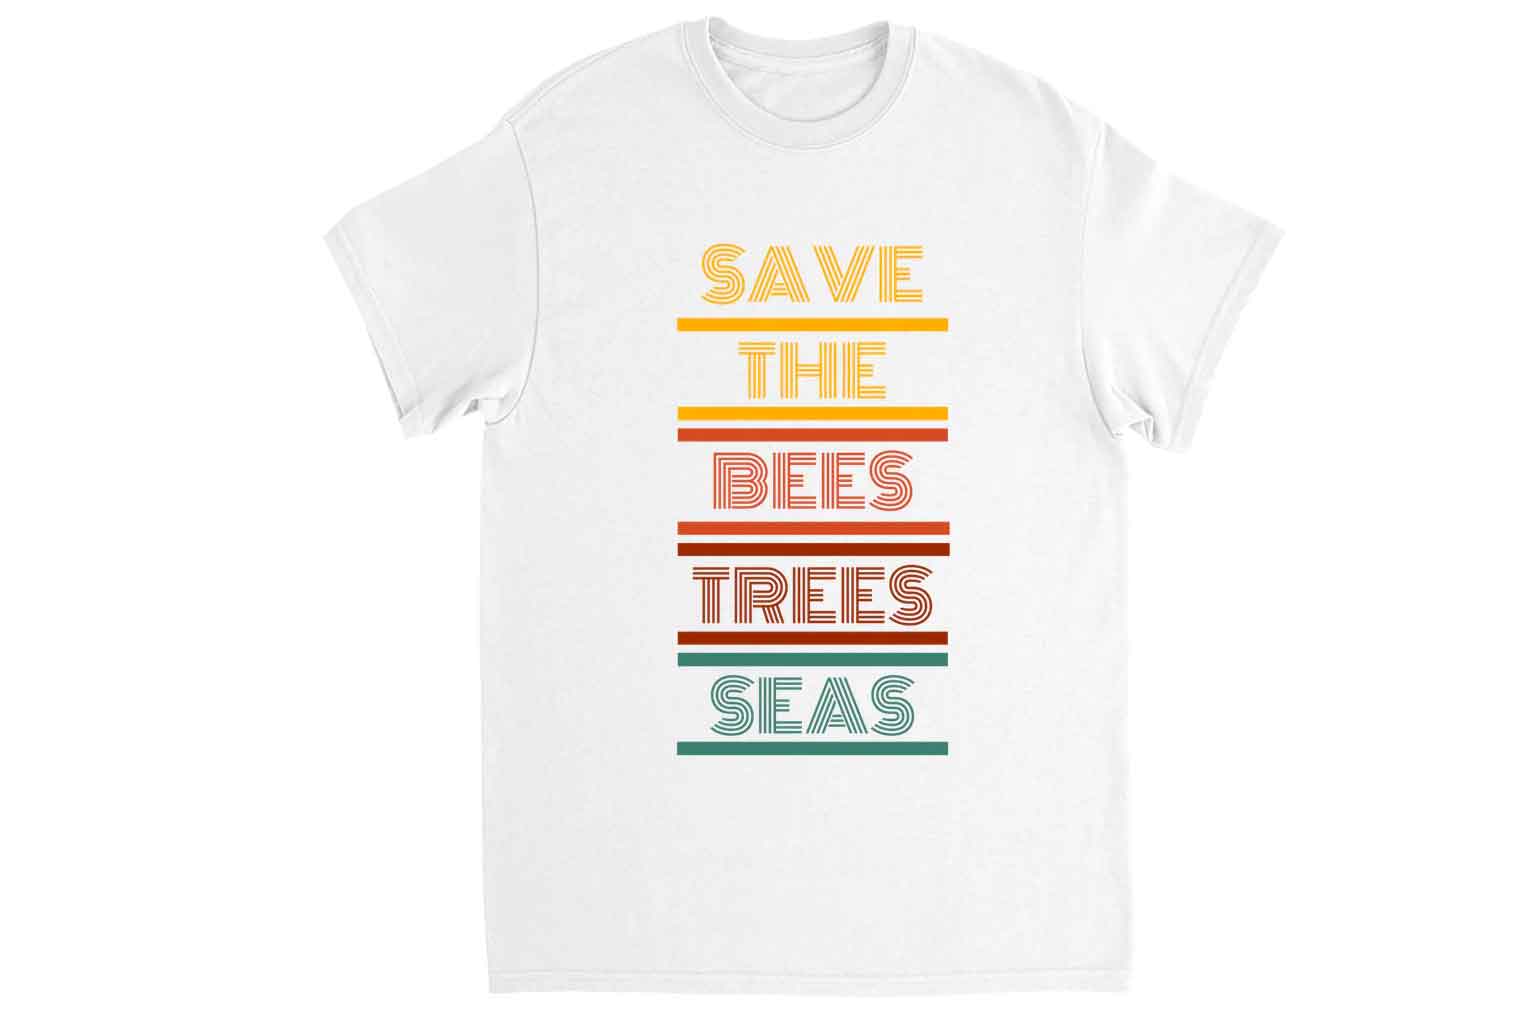 T-Shirts: A Canvas for Positive Environmental Messages and Bee Conservation